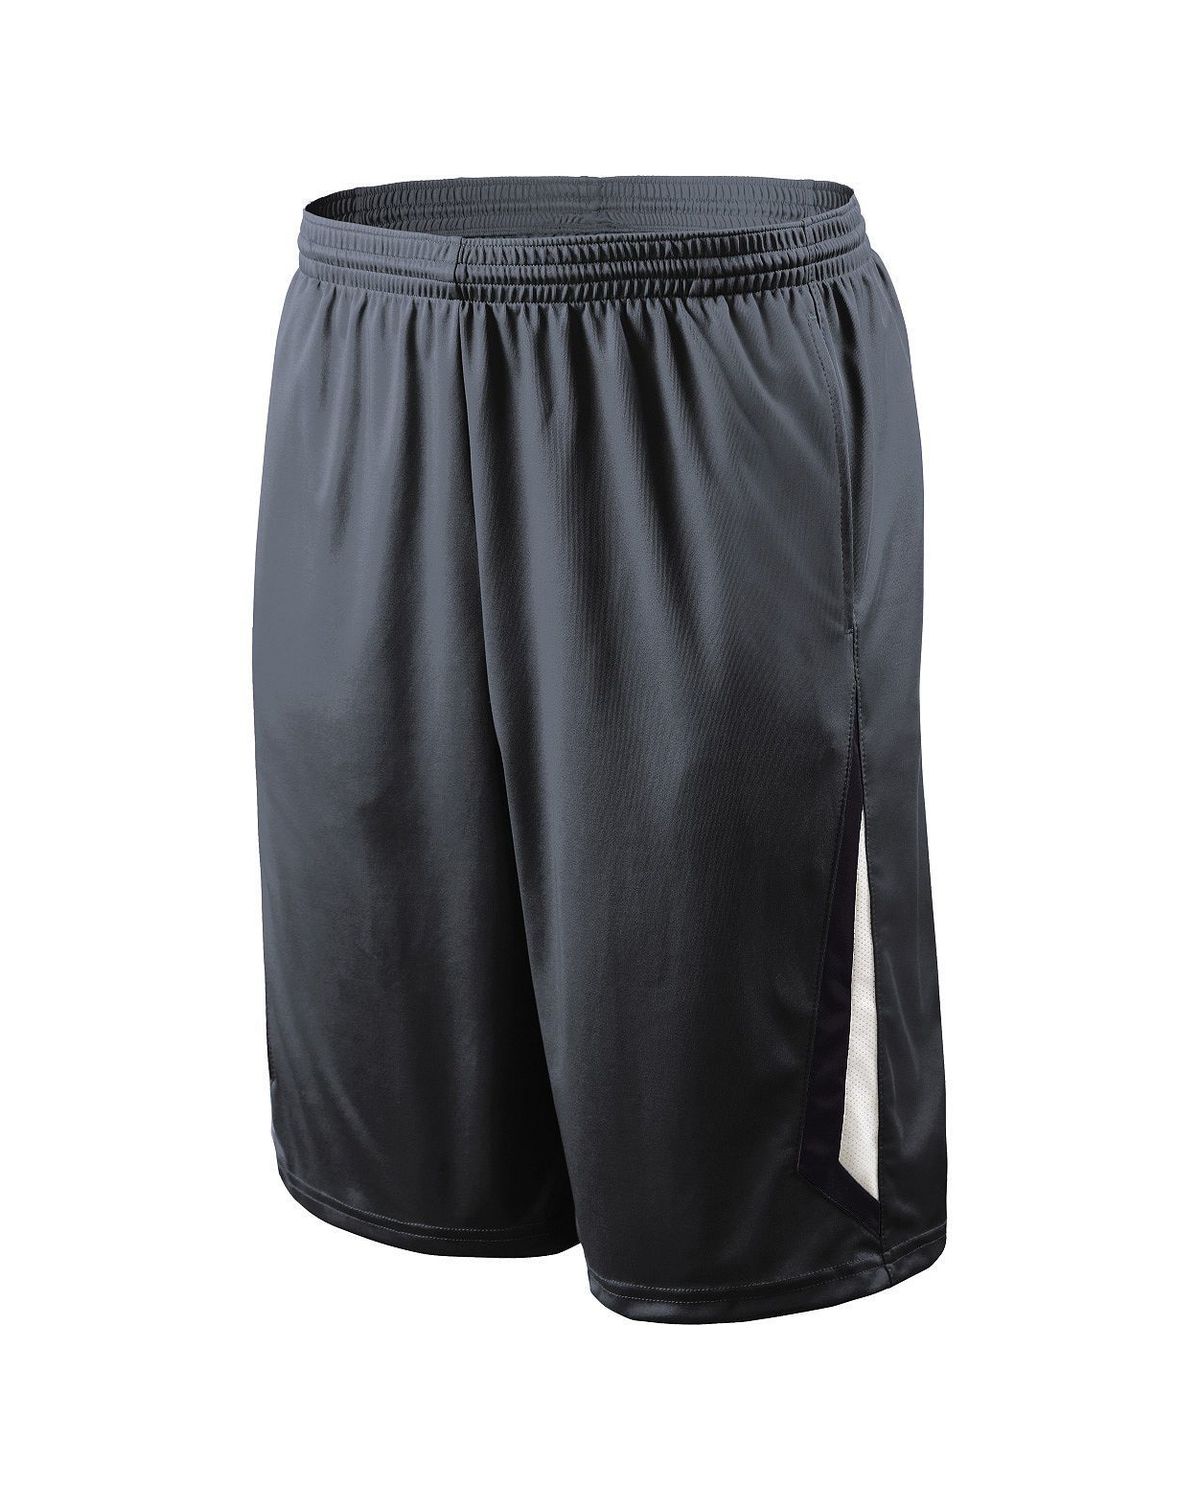 'Holloway 229266-C Youth Mobility Short'